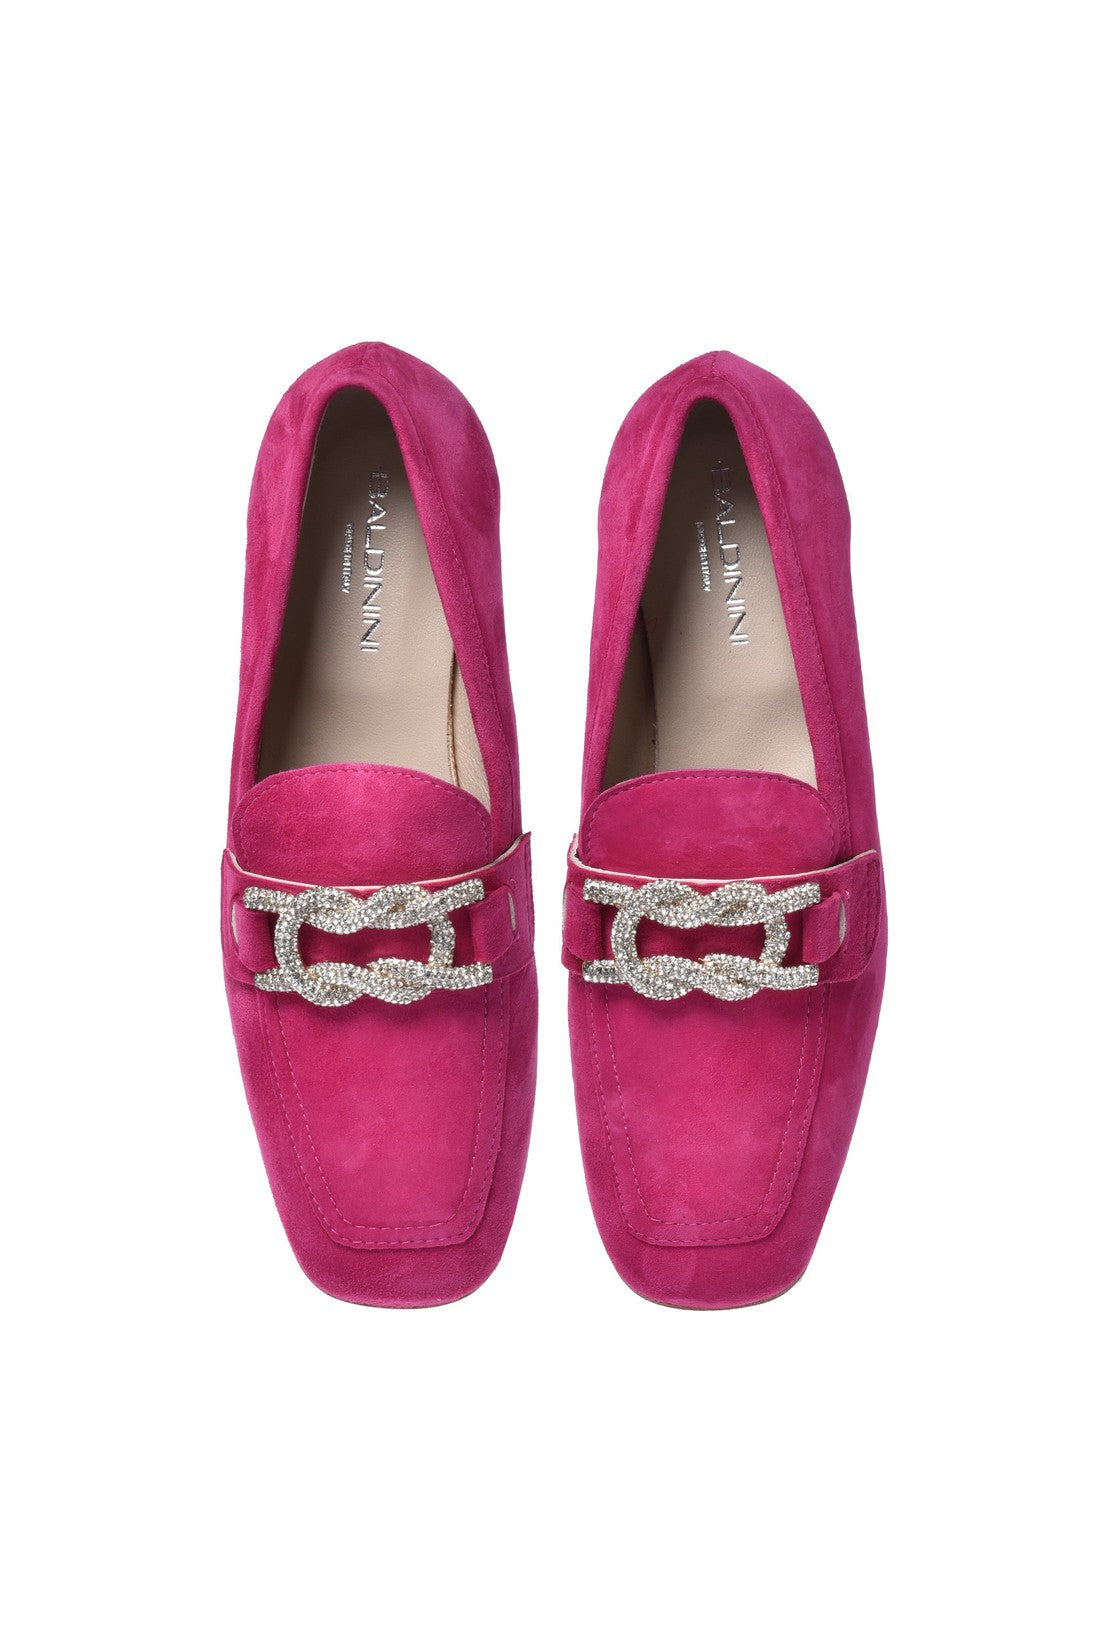 BALDININI-OUTLET-SALE-Loafer-in-fuchsia-suede-Halbschuhe-ARCHIVE-COLLECTION-2.jpg